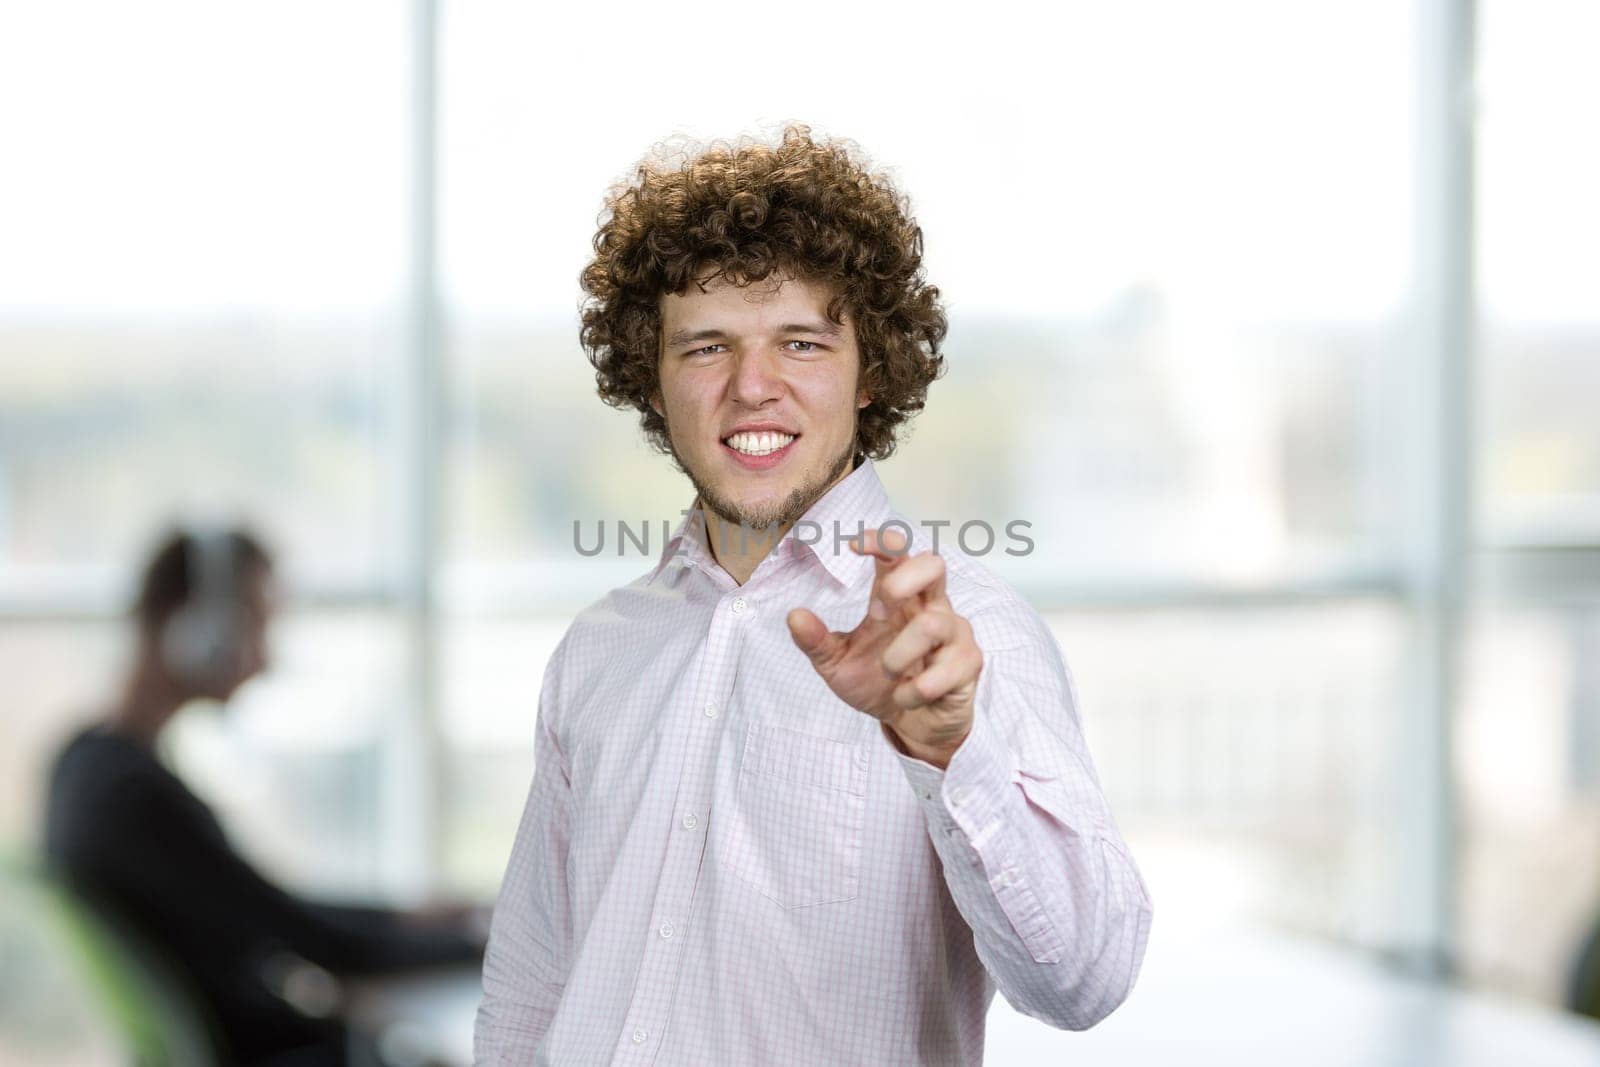 Portrait of a happy young cheerful man with curly hair shows his teeth and gesturing something. Blurred office interior in the background.